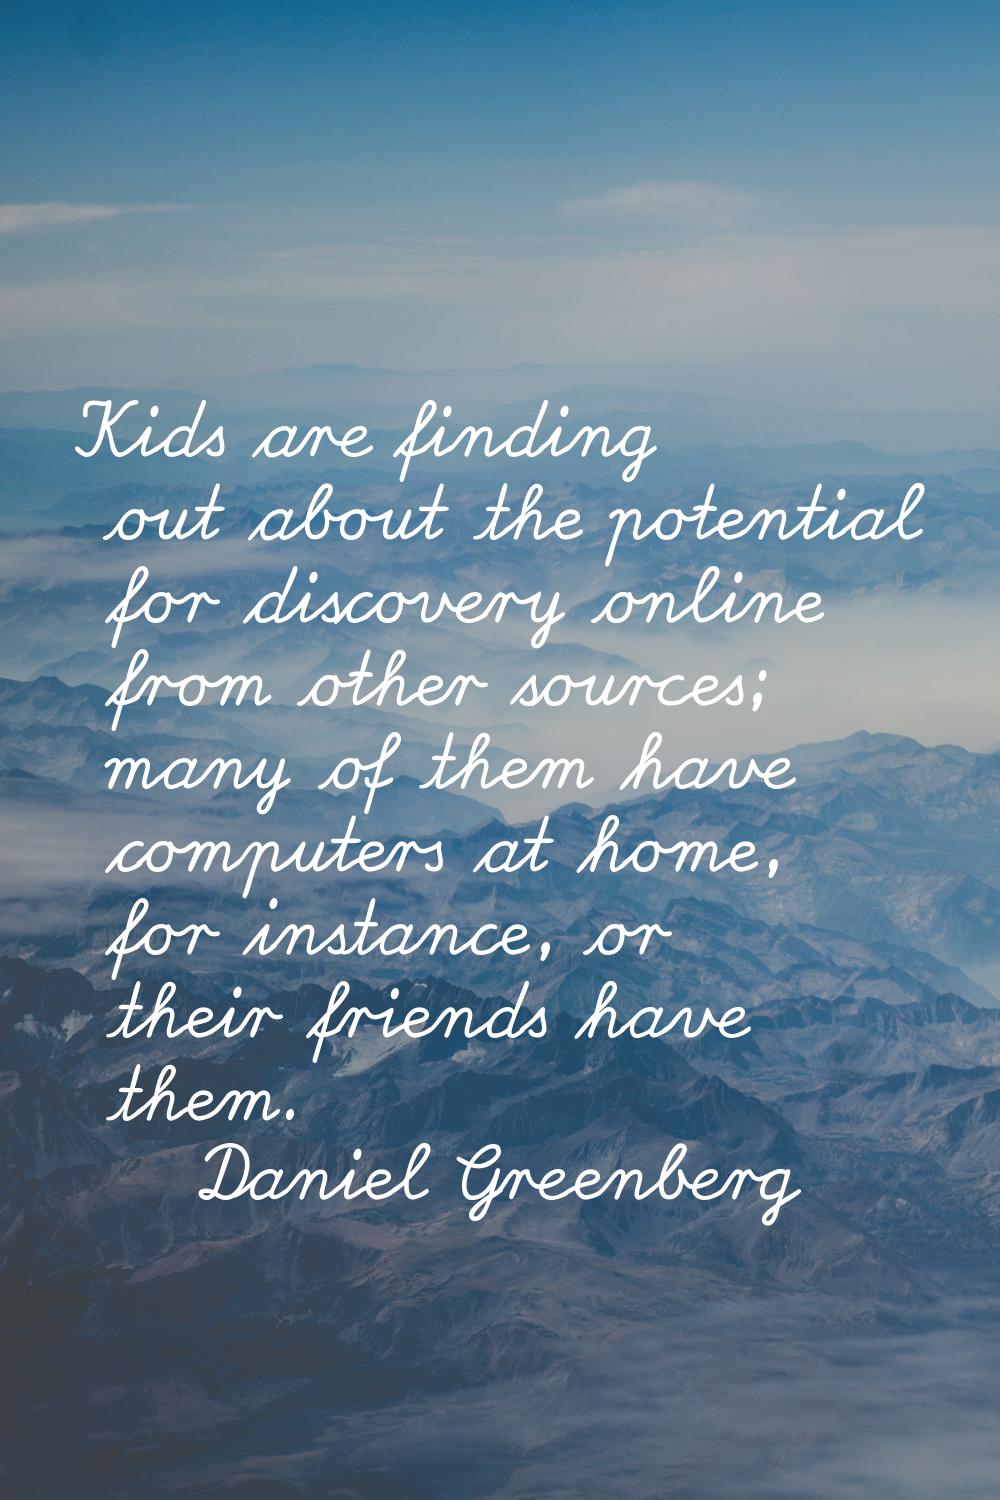 Kids are finding out about the potential for discovery online from other sources; many of them have